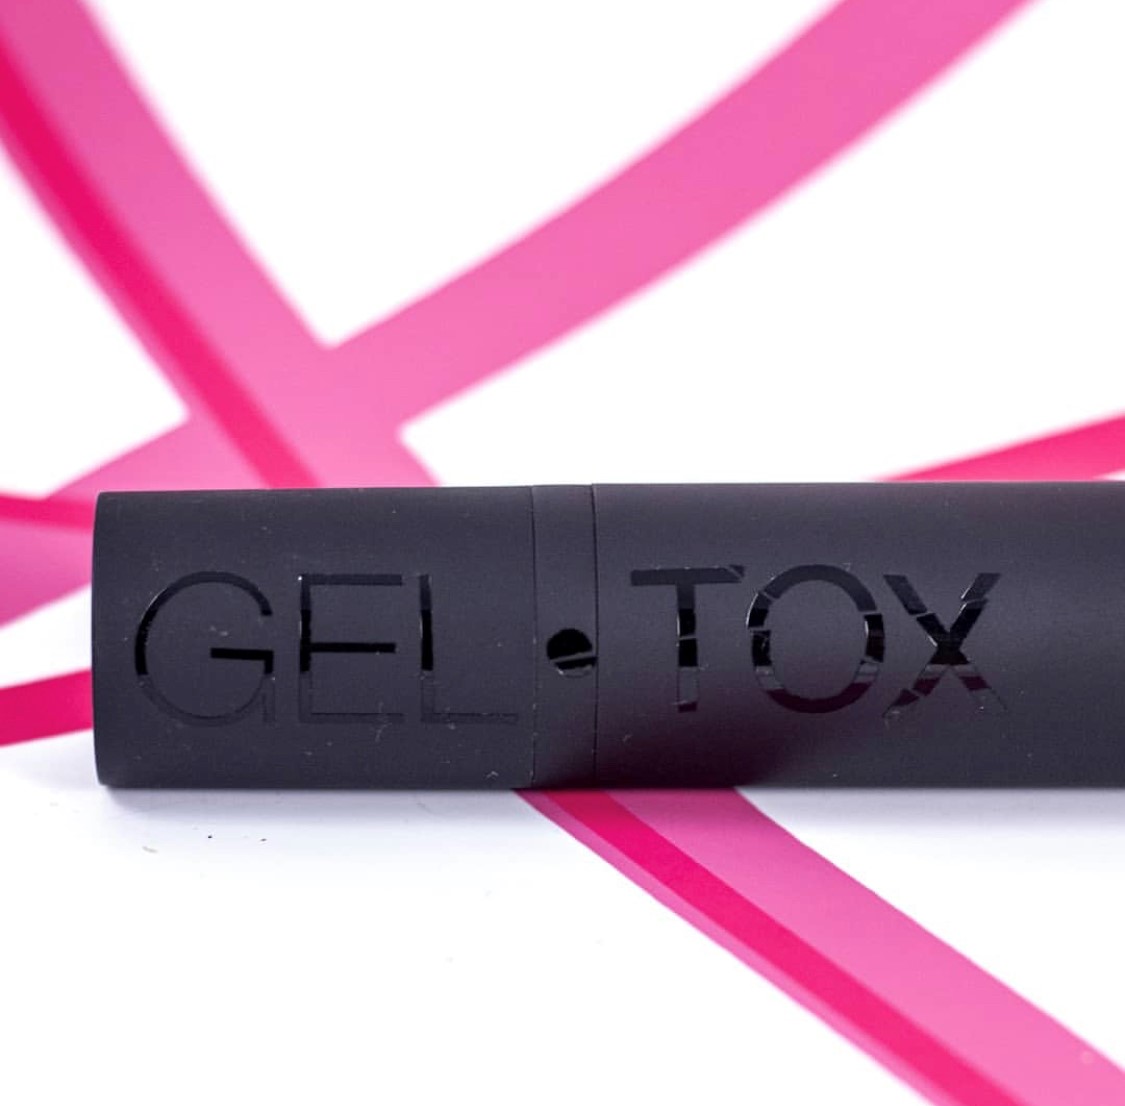 Austin Draving's Gel Tox was a product designed to remove gel nail polish